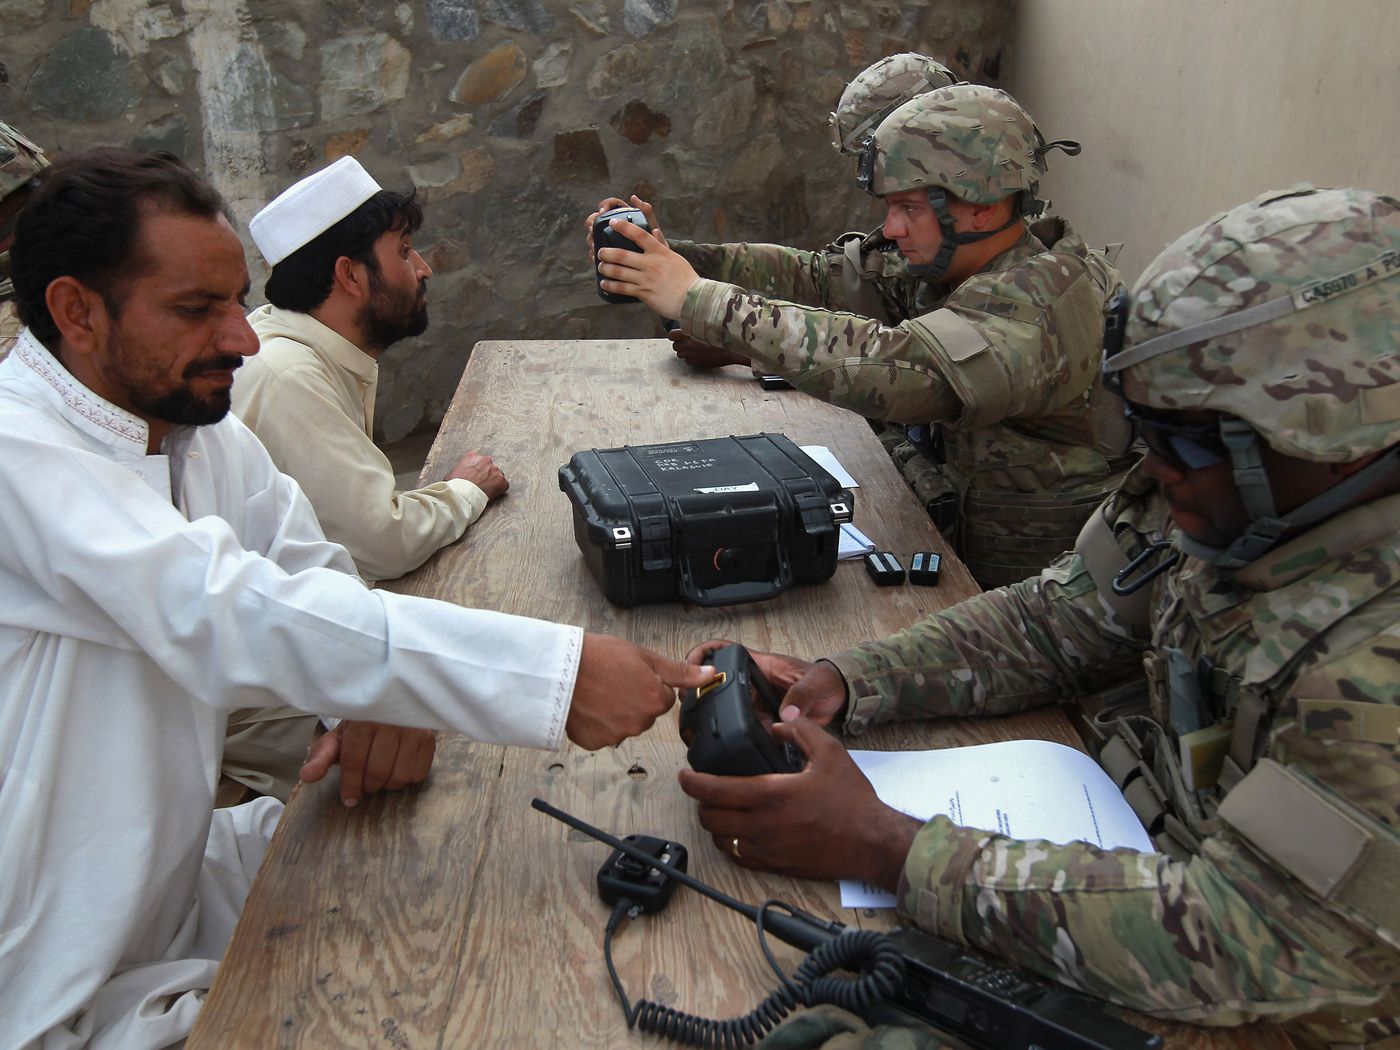 Talibans are captured the US military's biometric devices